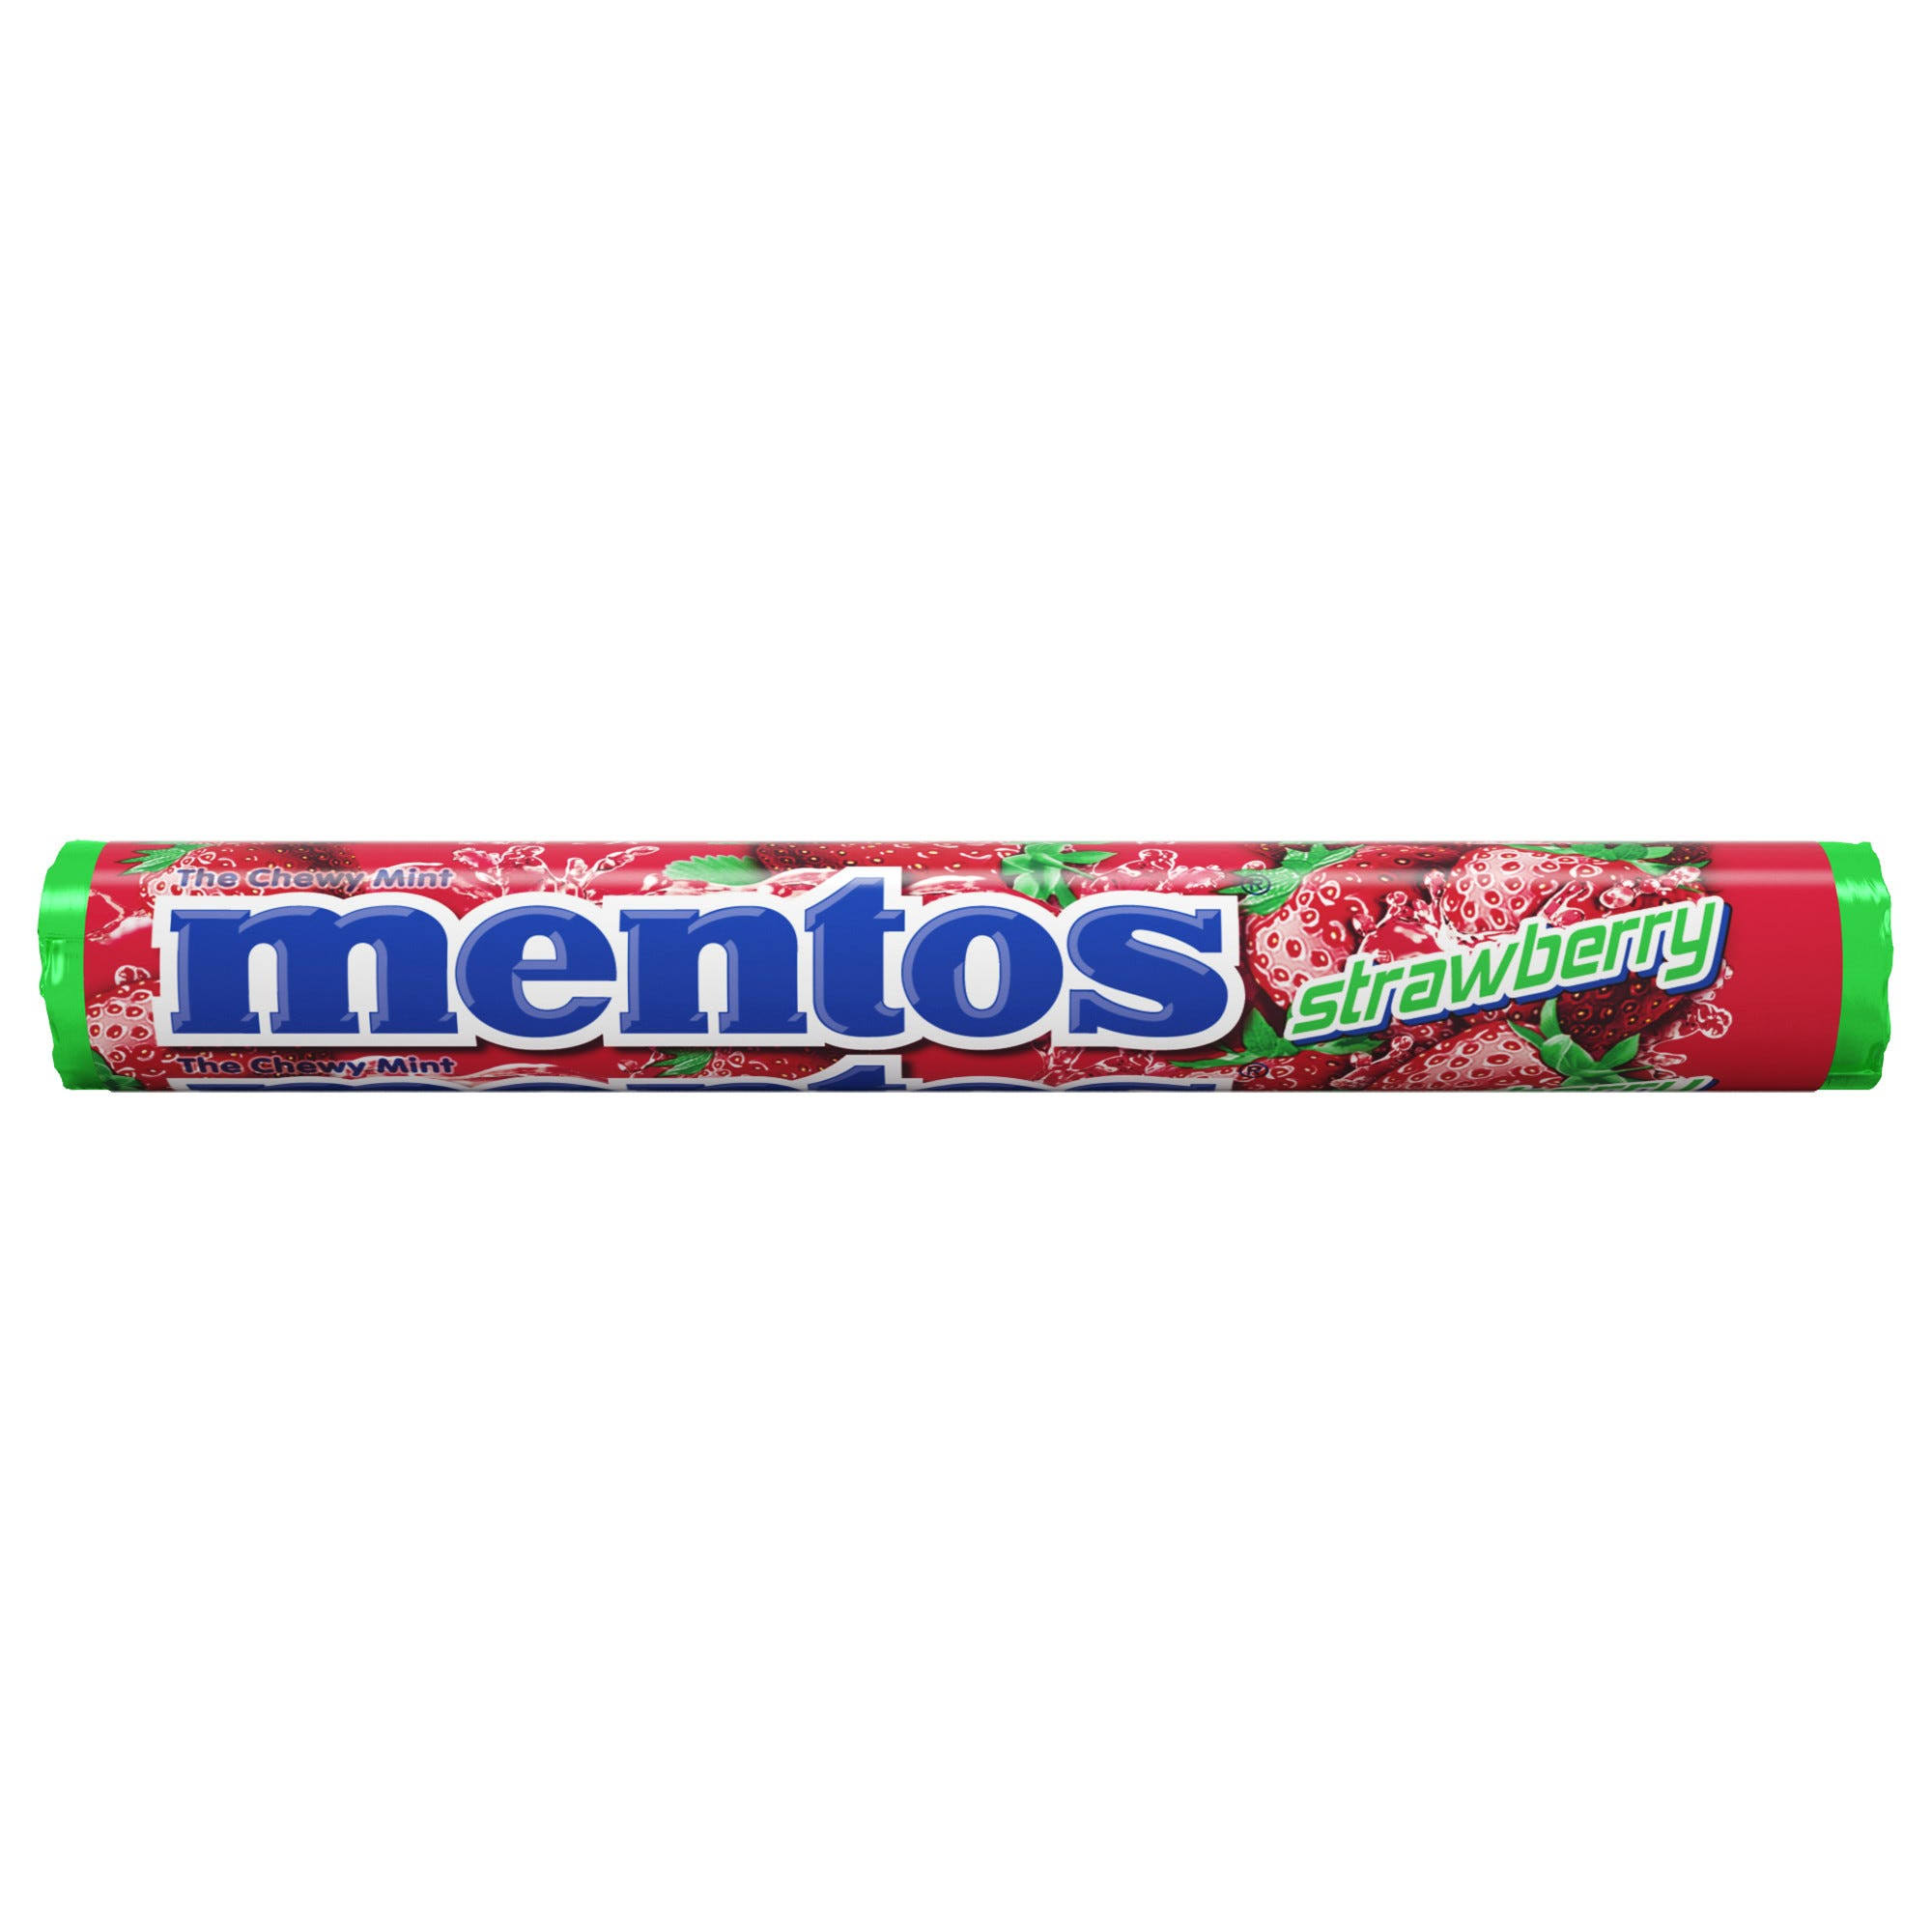 Mentos - Strawberry (Pack of 2)